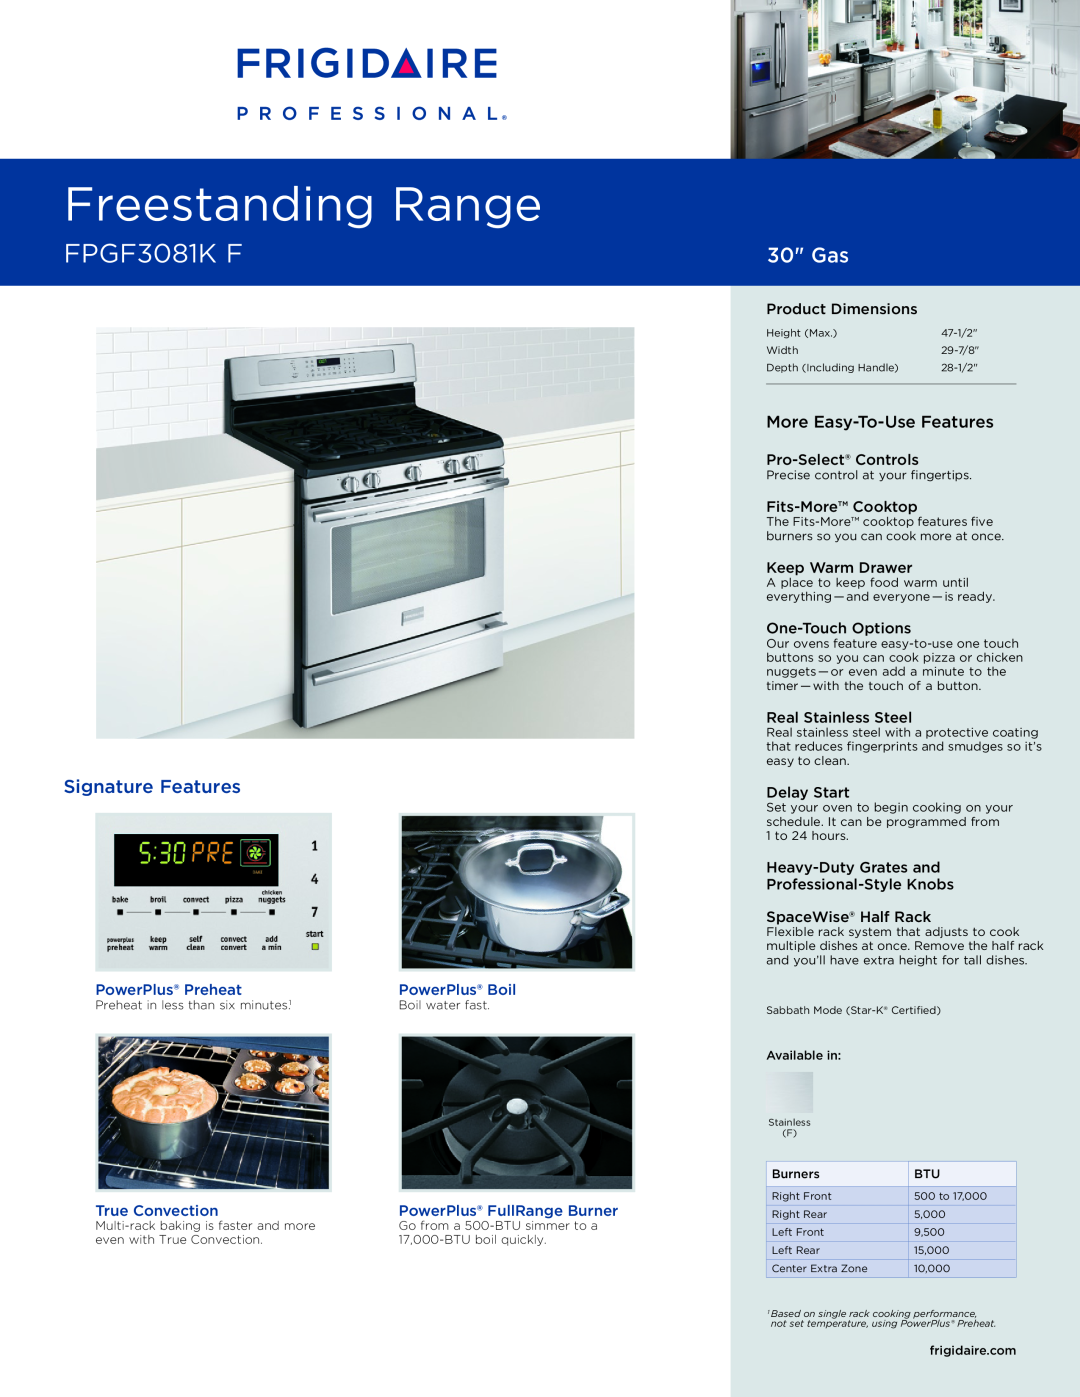 Frigidaire FPGF3081K F dimensions Product Dimensions, Pro-SelectControls, Fits-MoreCooktop, Keep Warm Drawer, Delay Start 